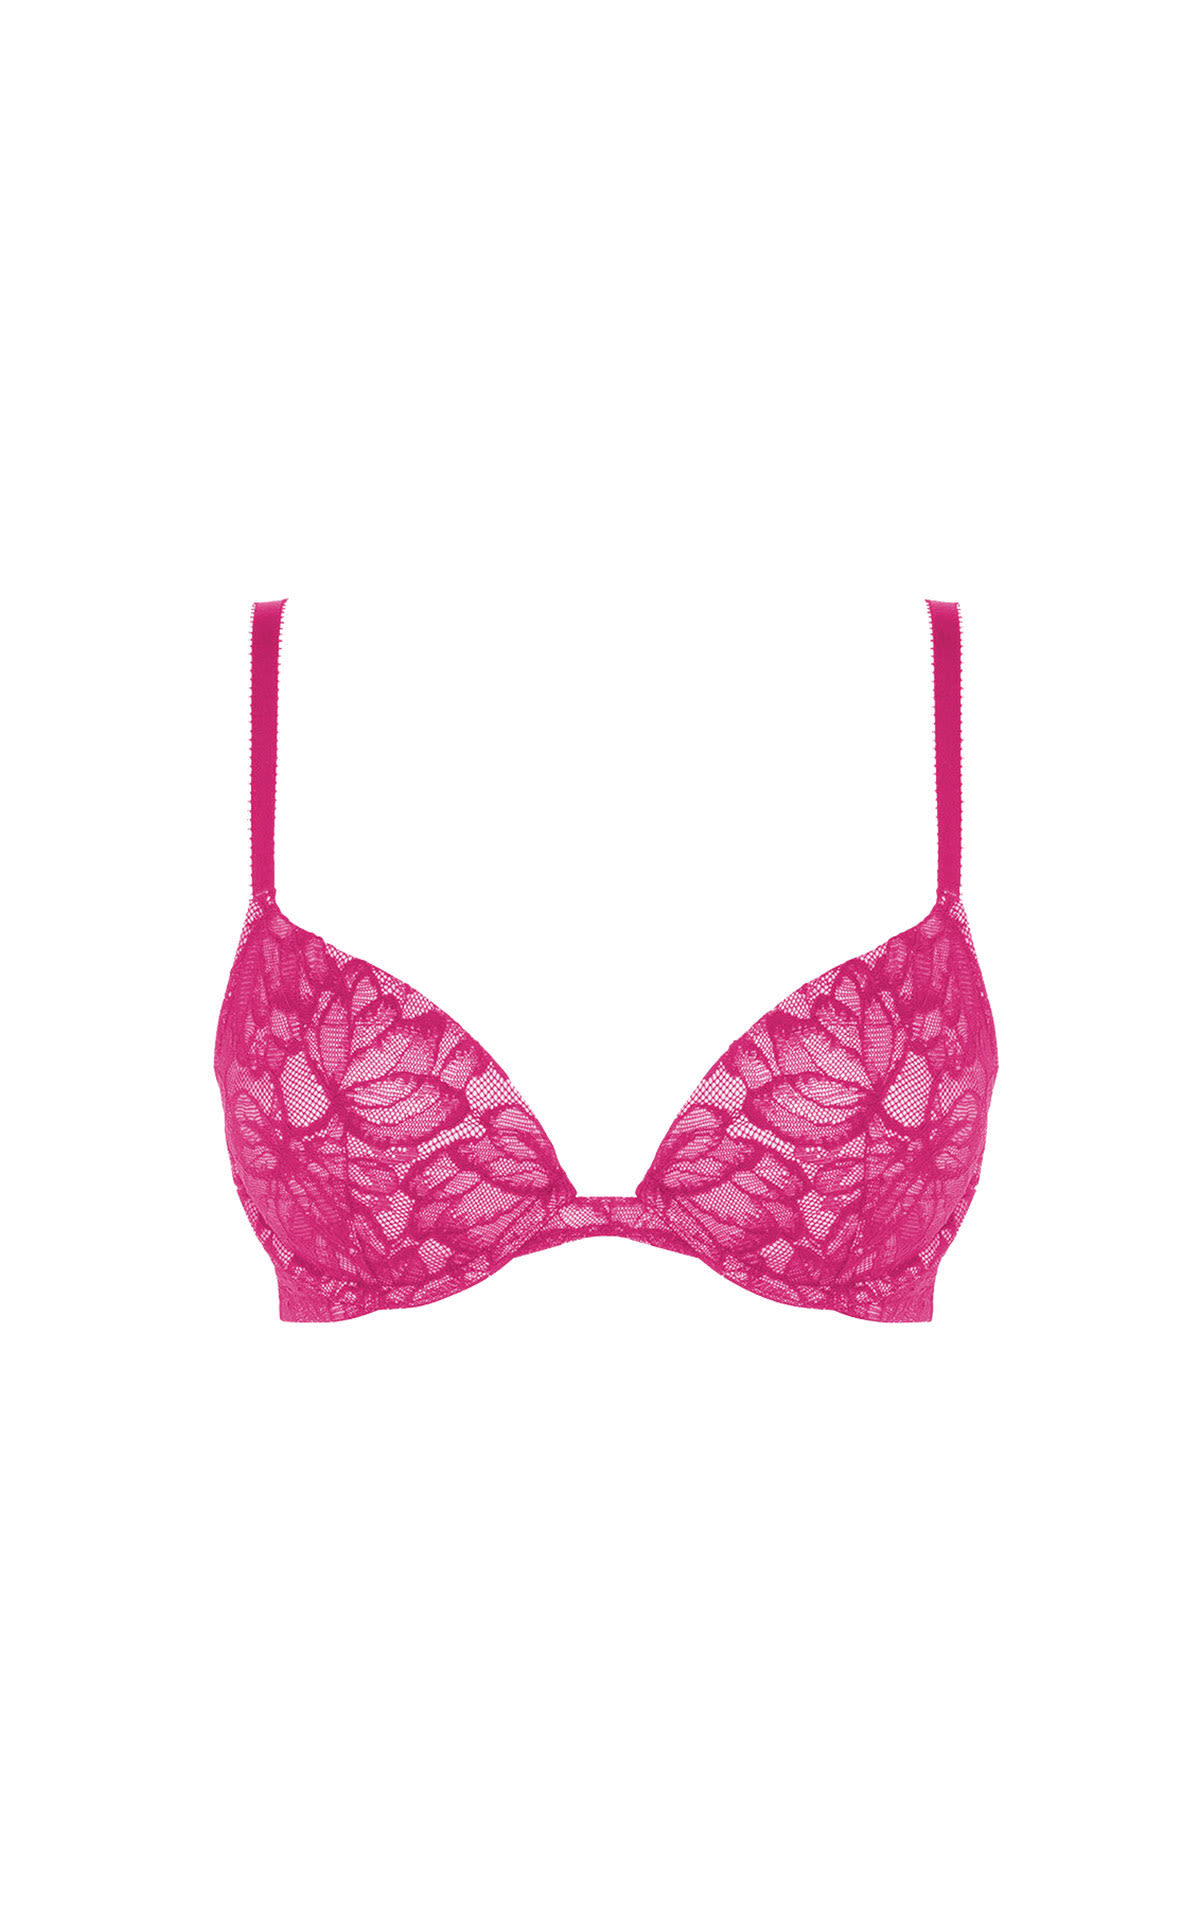 Wolford Magnolia push-up bra from Bicester Village